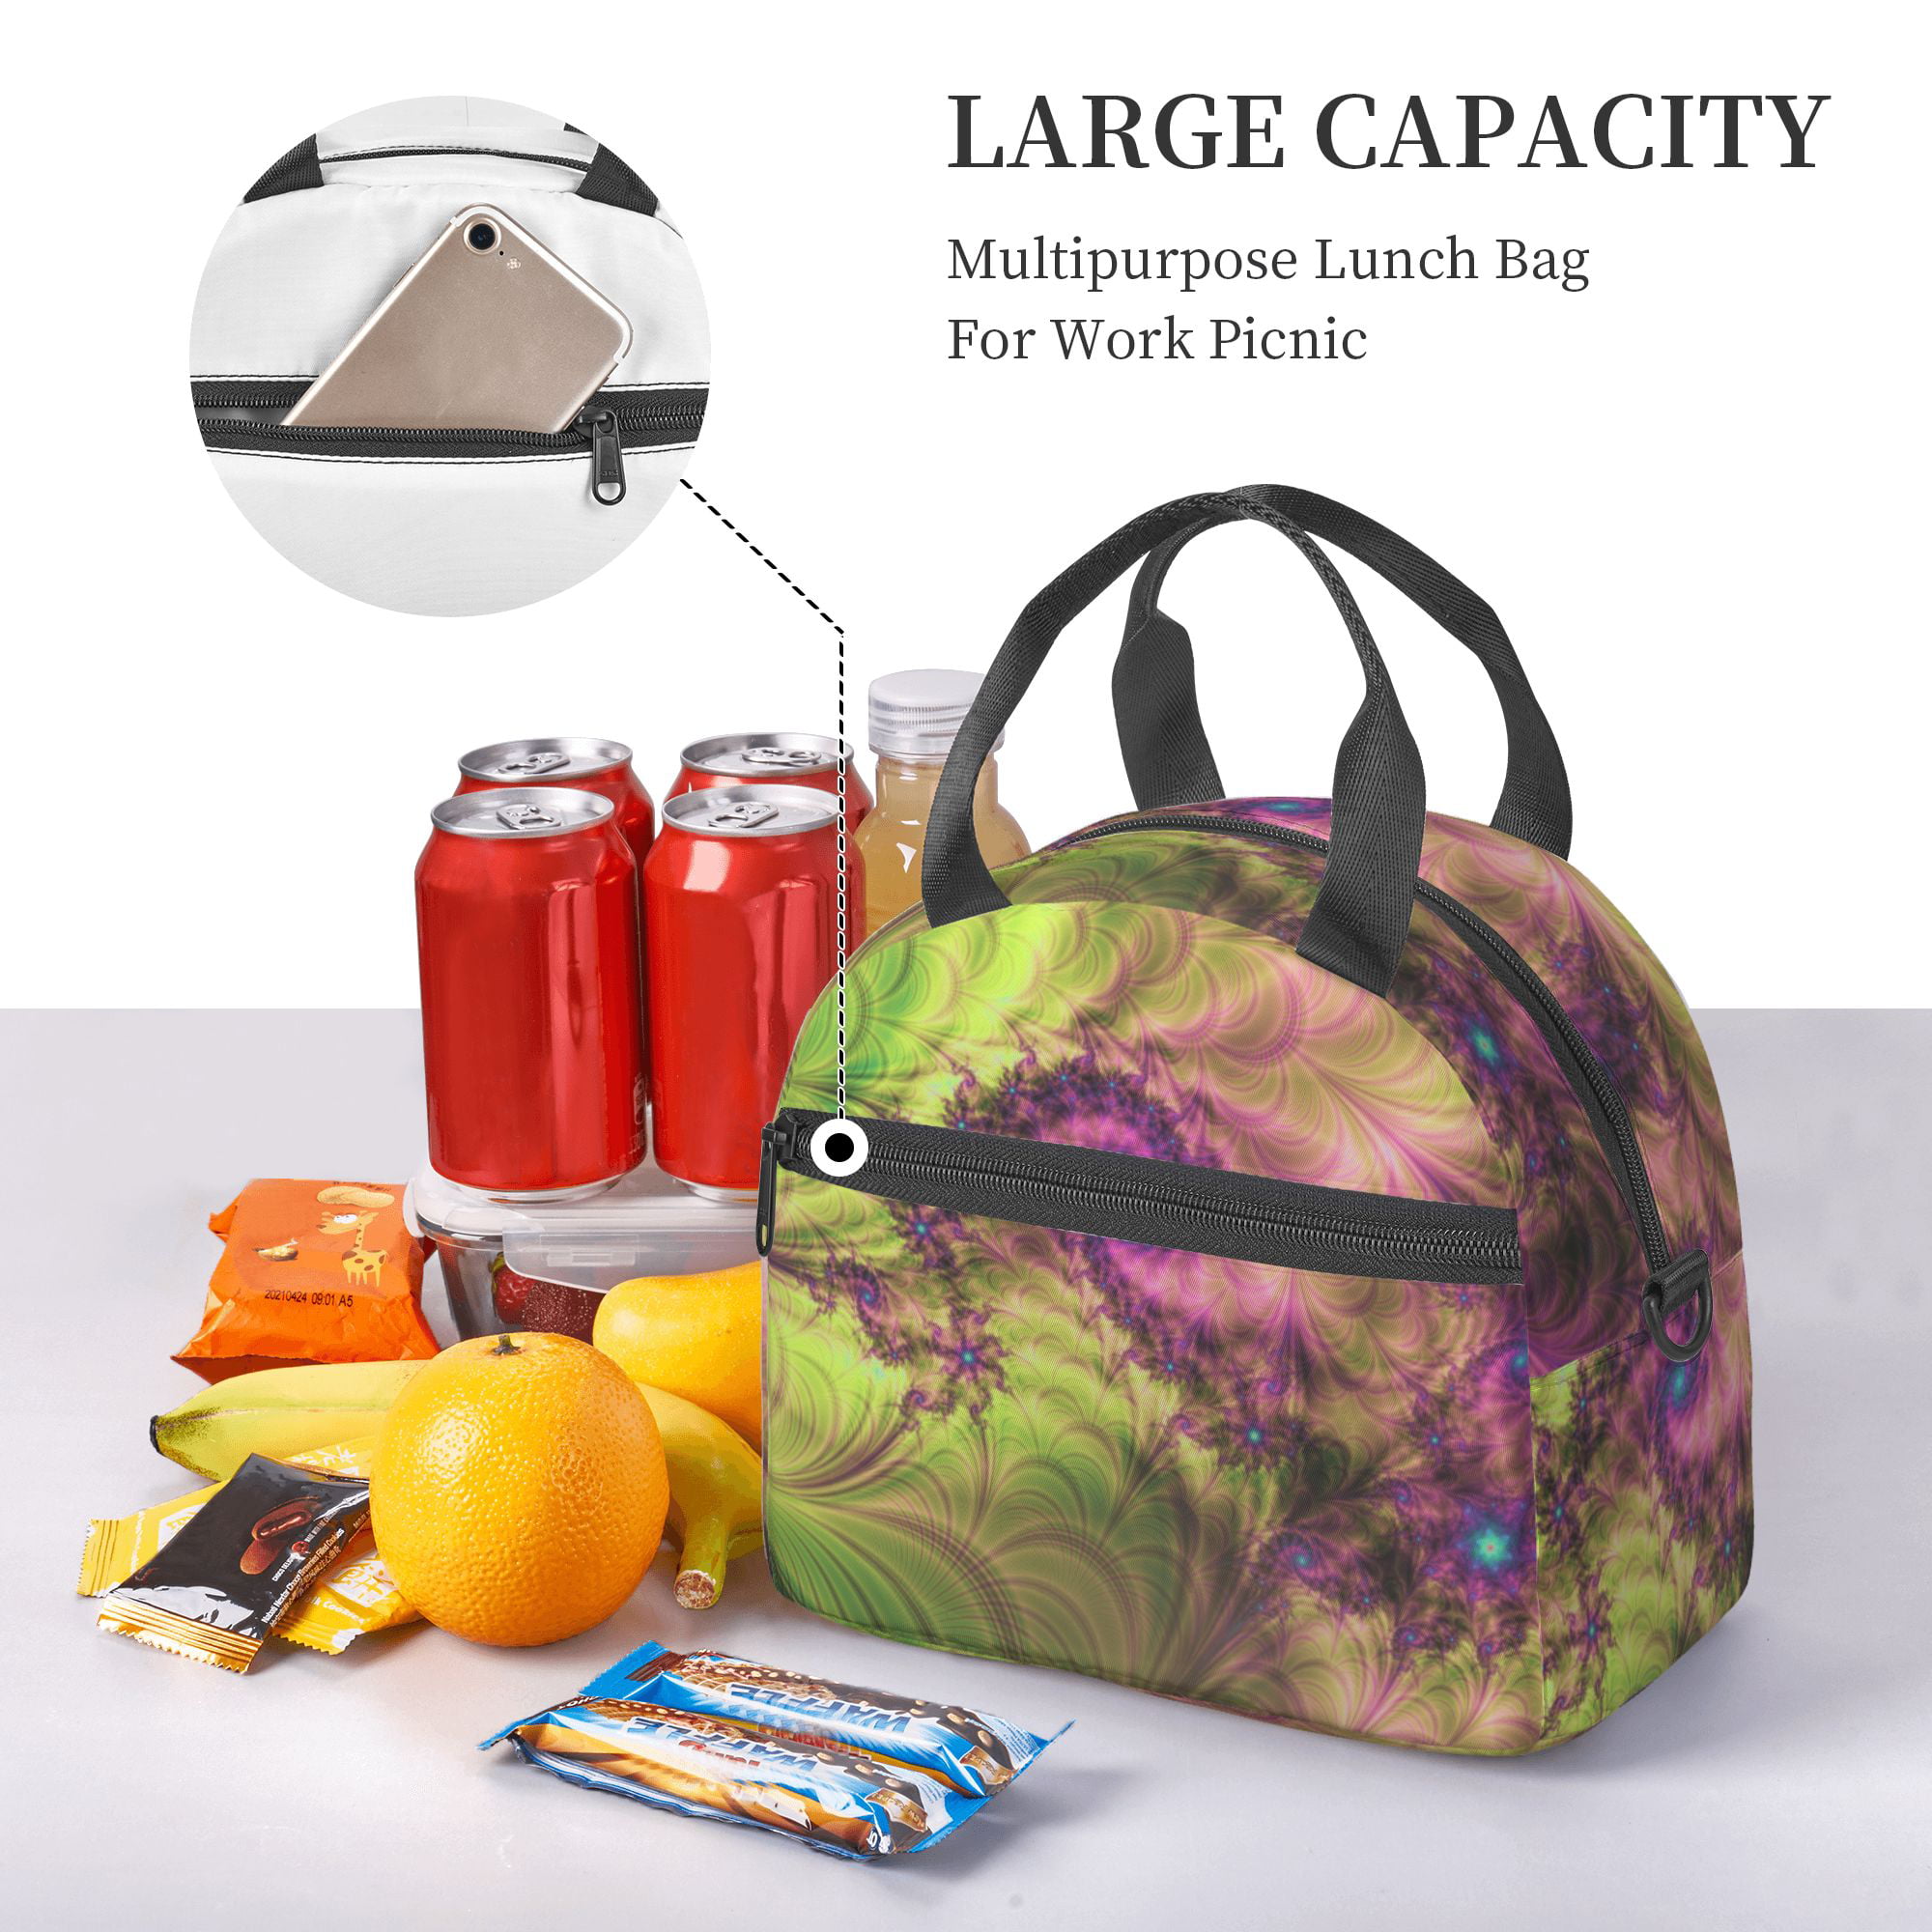 DouZhe Lunch Bags for Women and Men, Fractal Twirl Whirlpool Prints  Reusable Portable Insulated Cooler Waterproof Lunch Tote Bag for Travel  Work